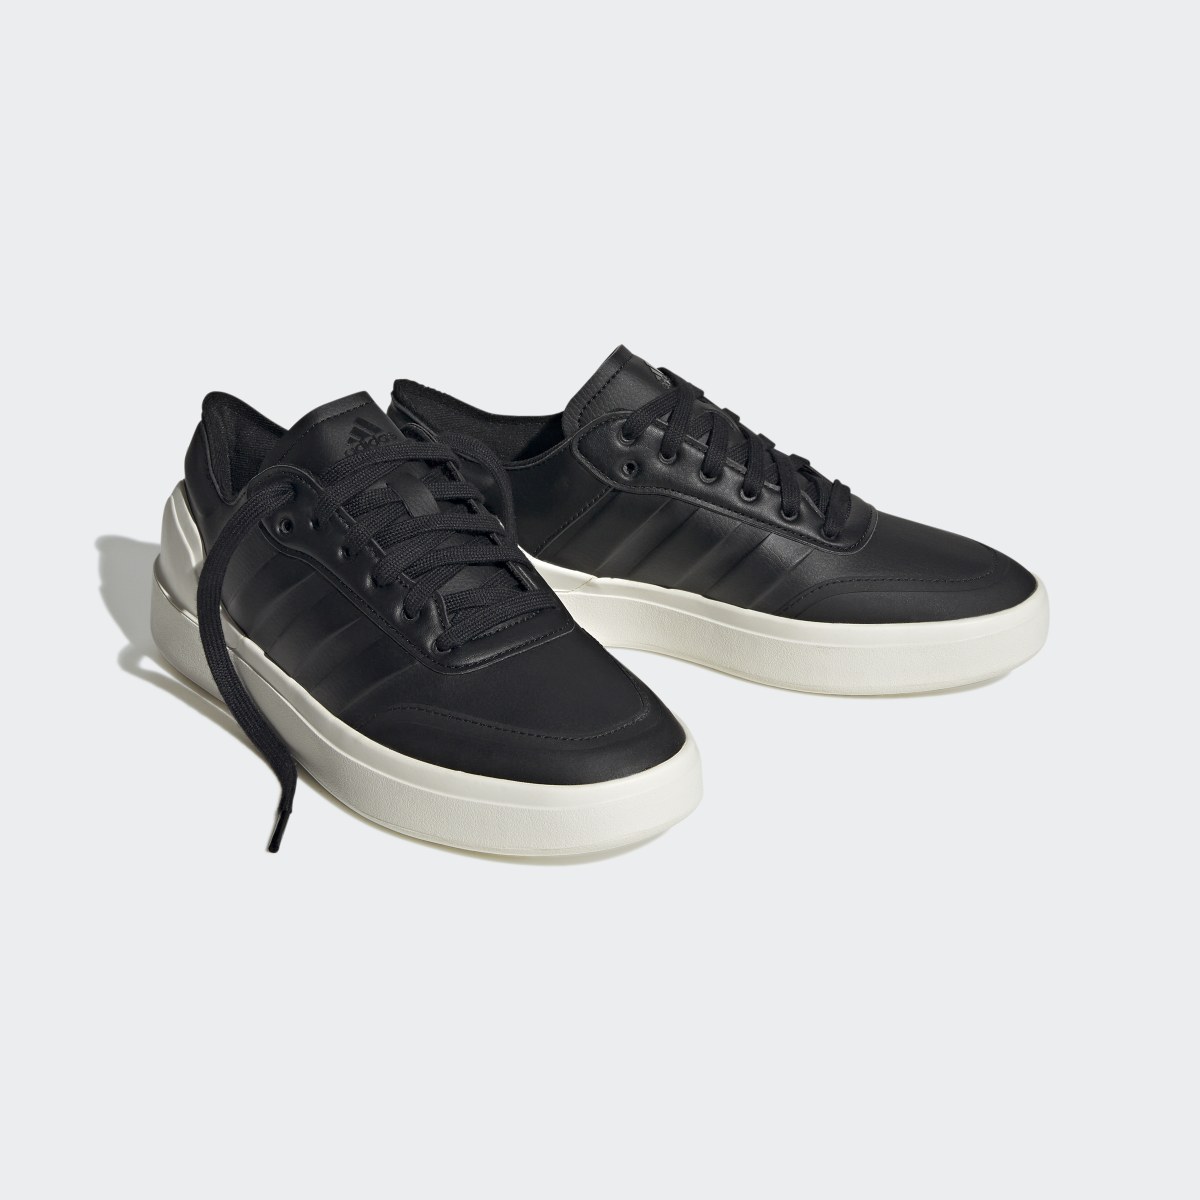 Adidas Court Revival Modern Shoes. 5